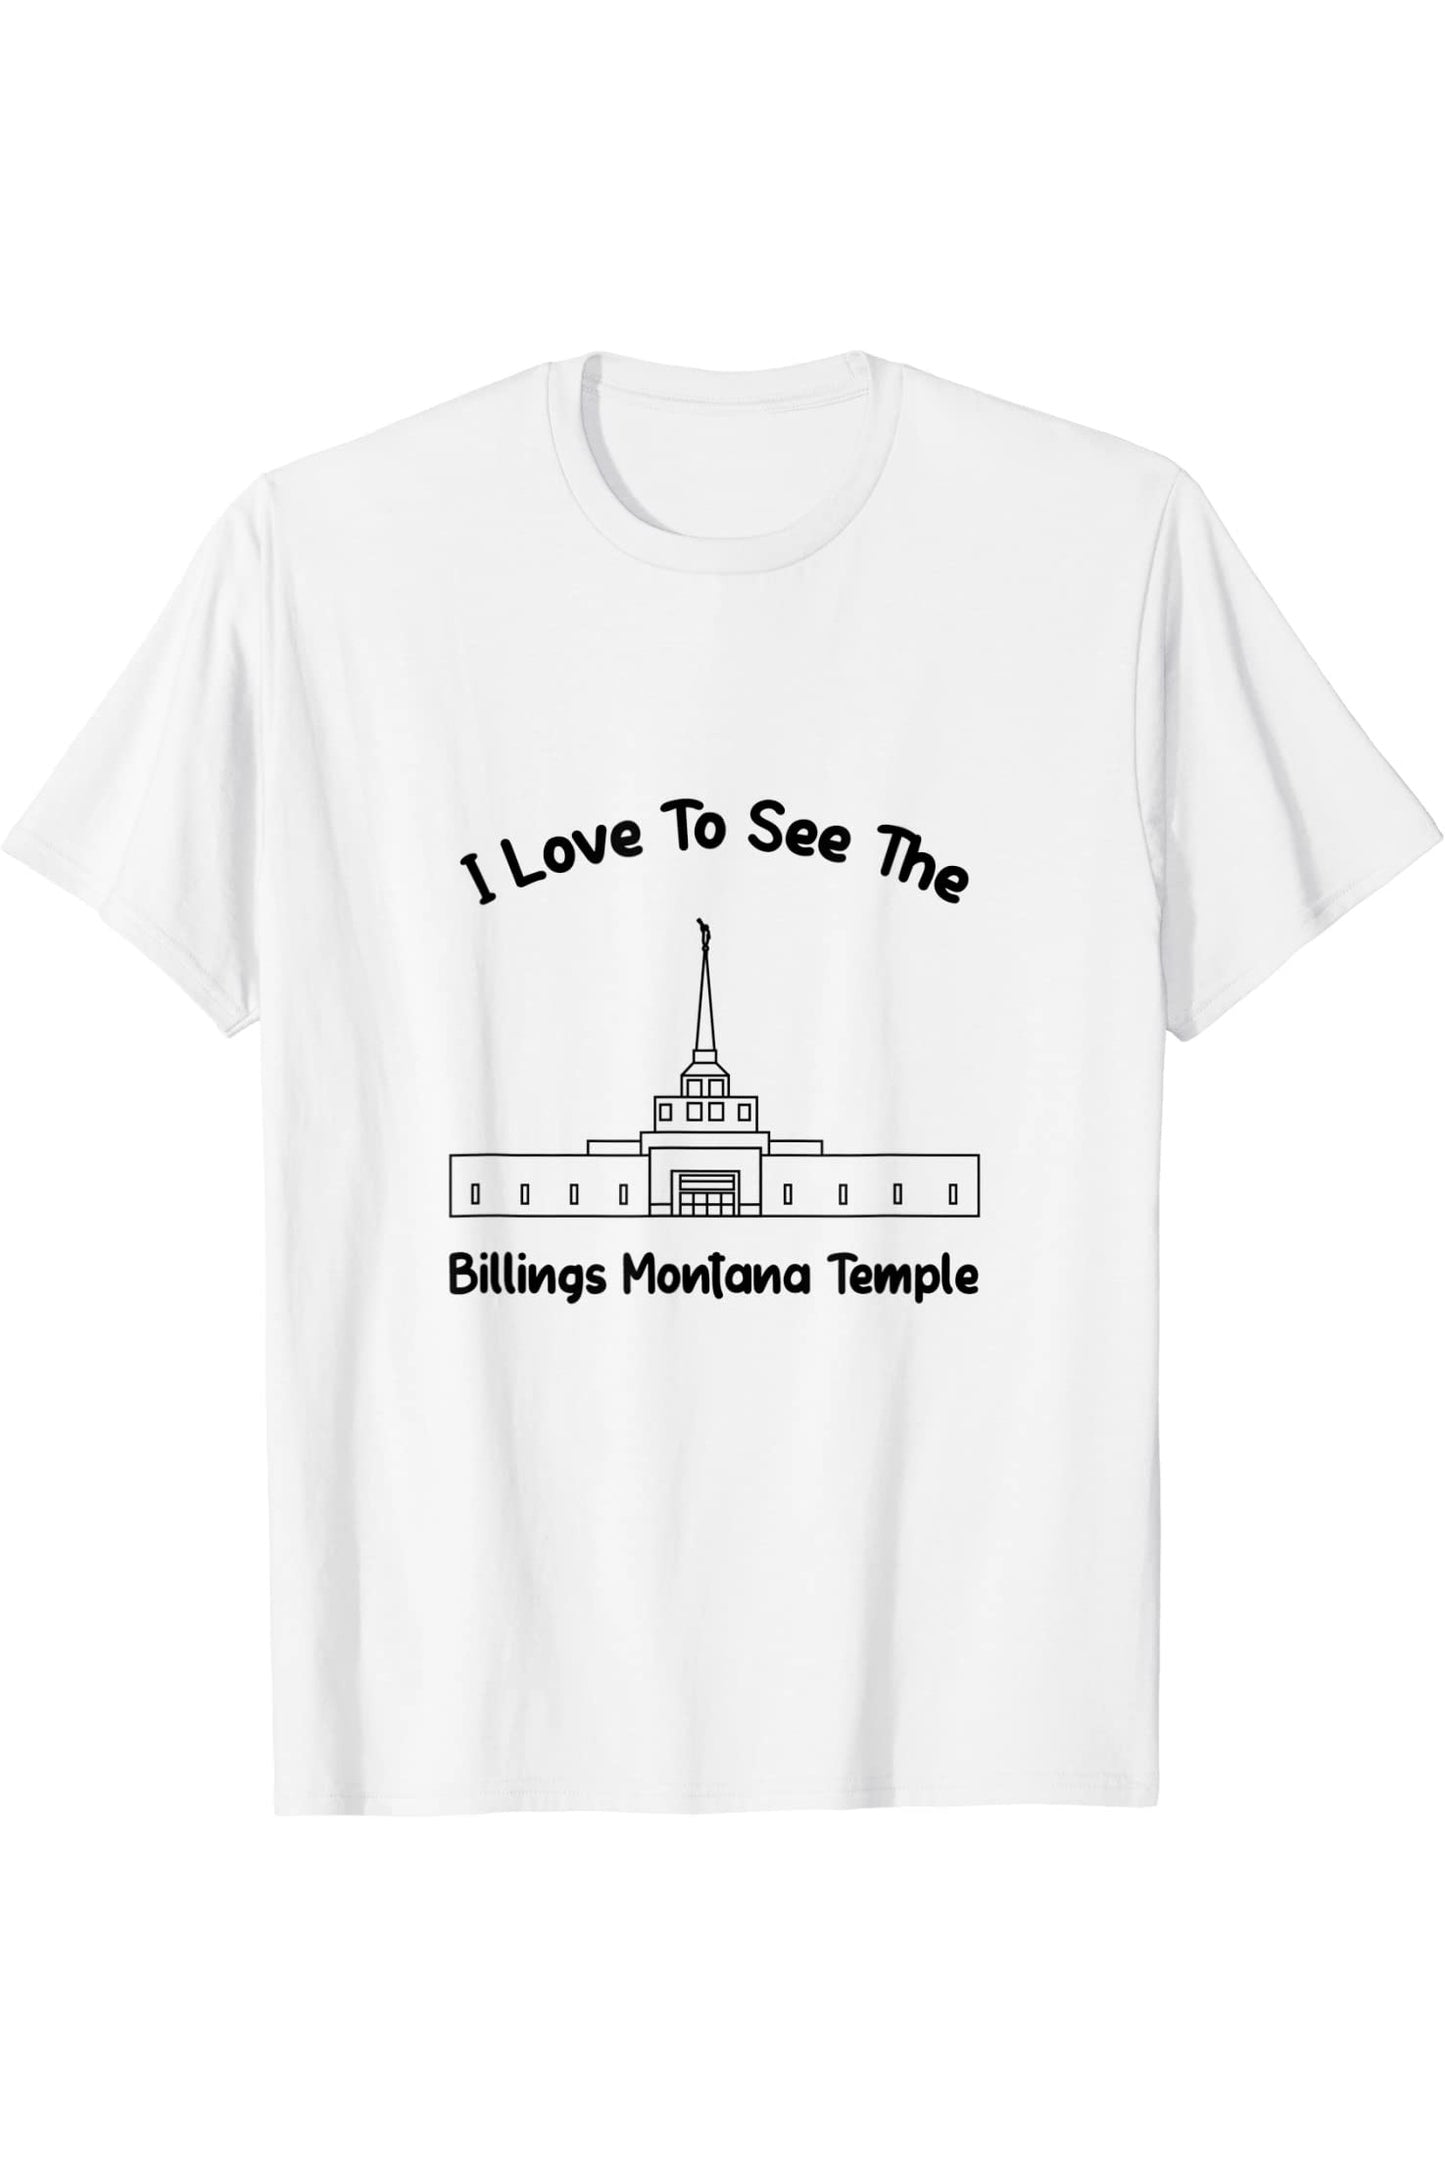 Billings Montana Temple T-Shirt - Primary Style (English) US